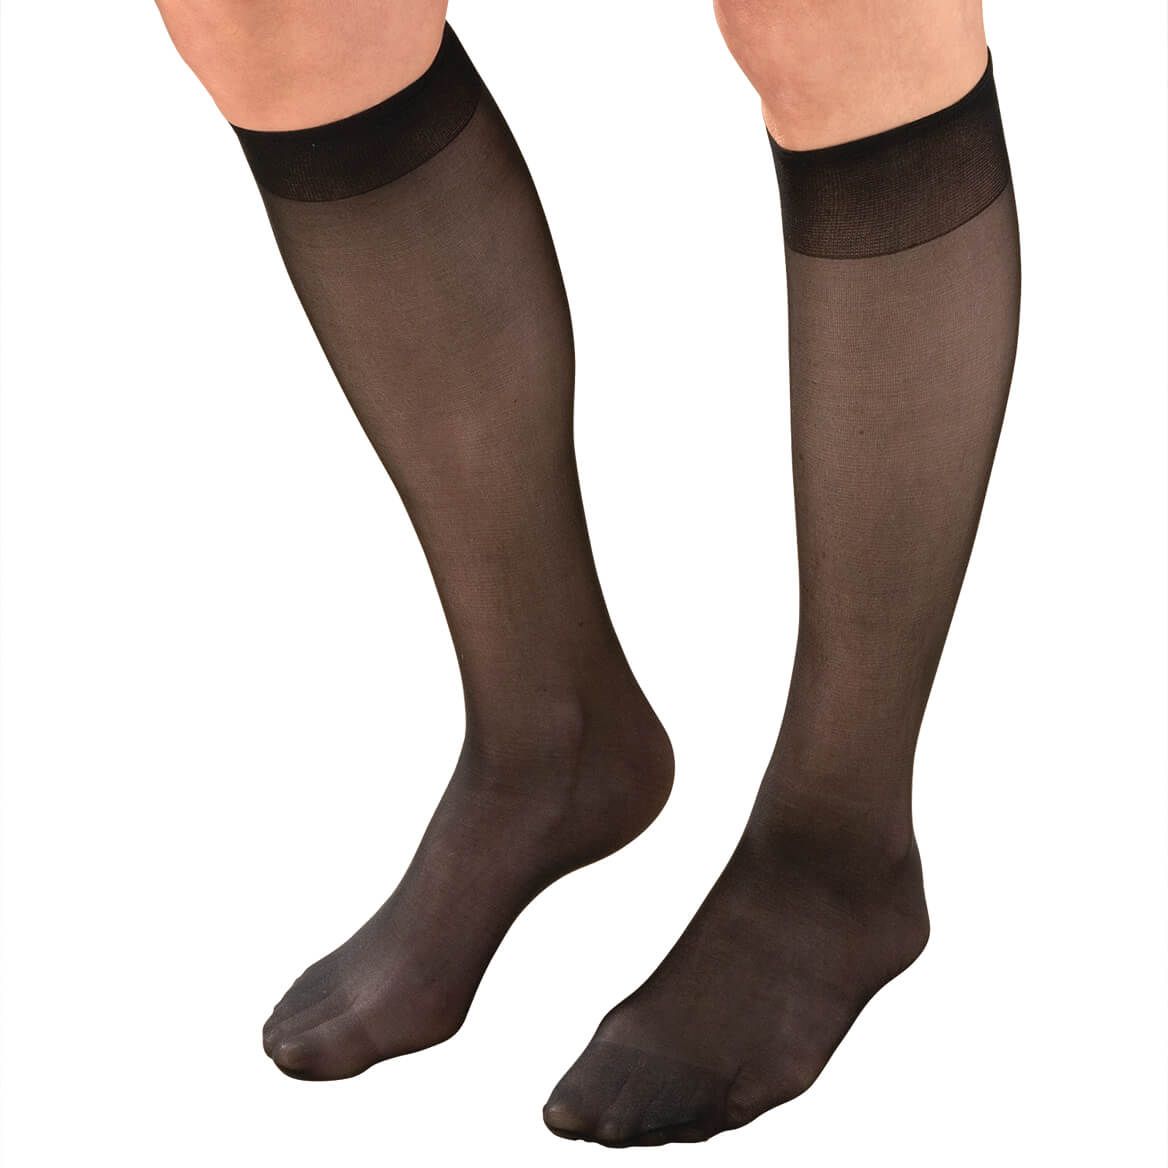 Women's Support Knee Highs, 9 pack + '-' + 345496